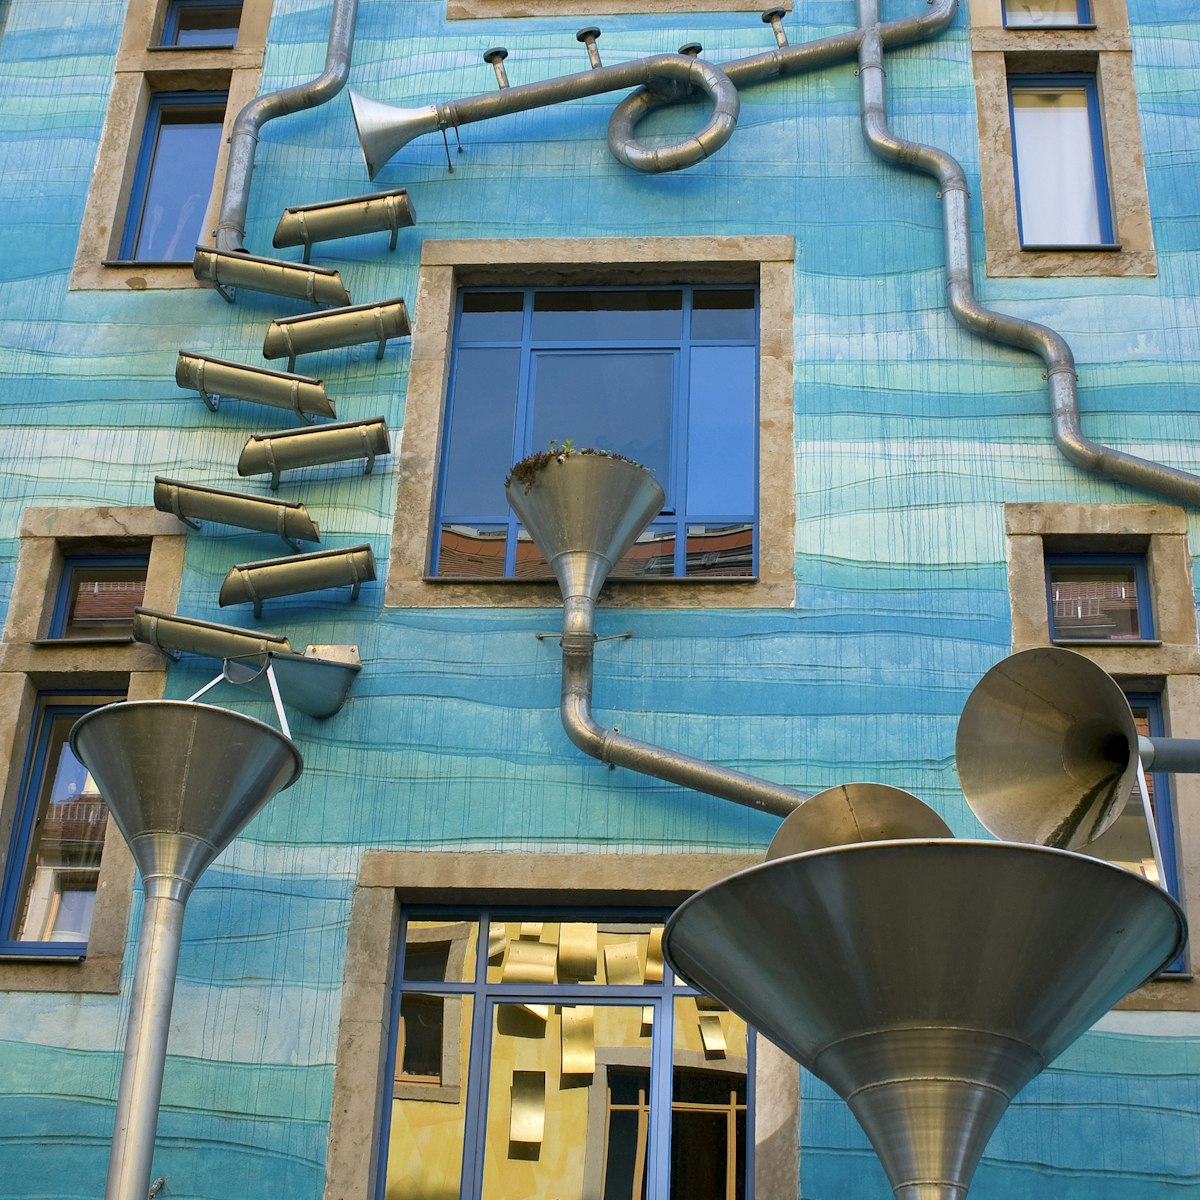 Germany, Saxony State, Dresden, drainpipes on a facade of Kunsthof Passage